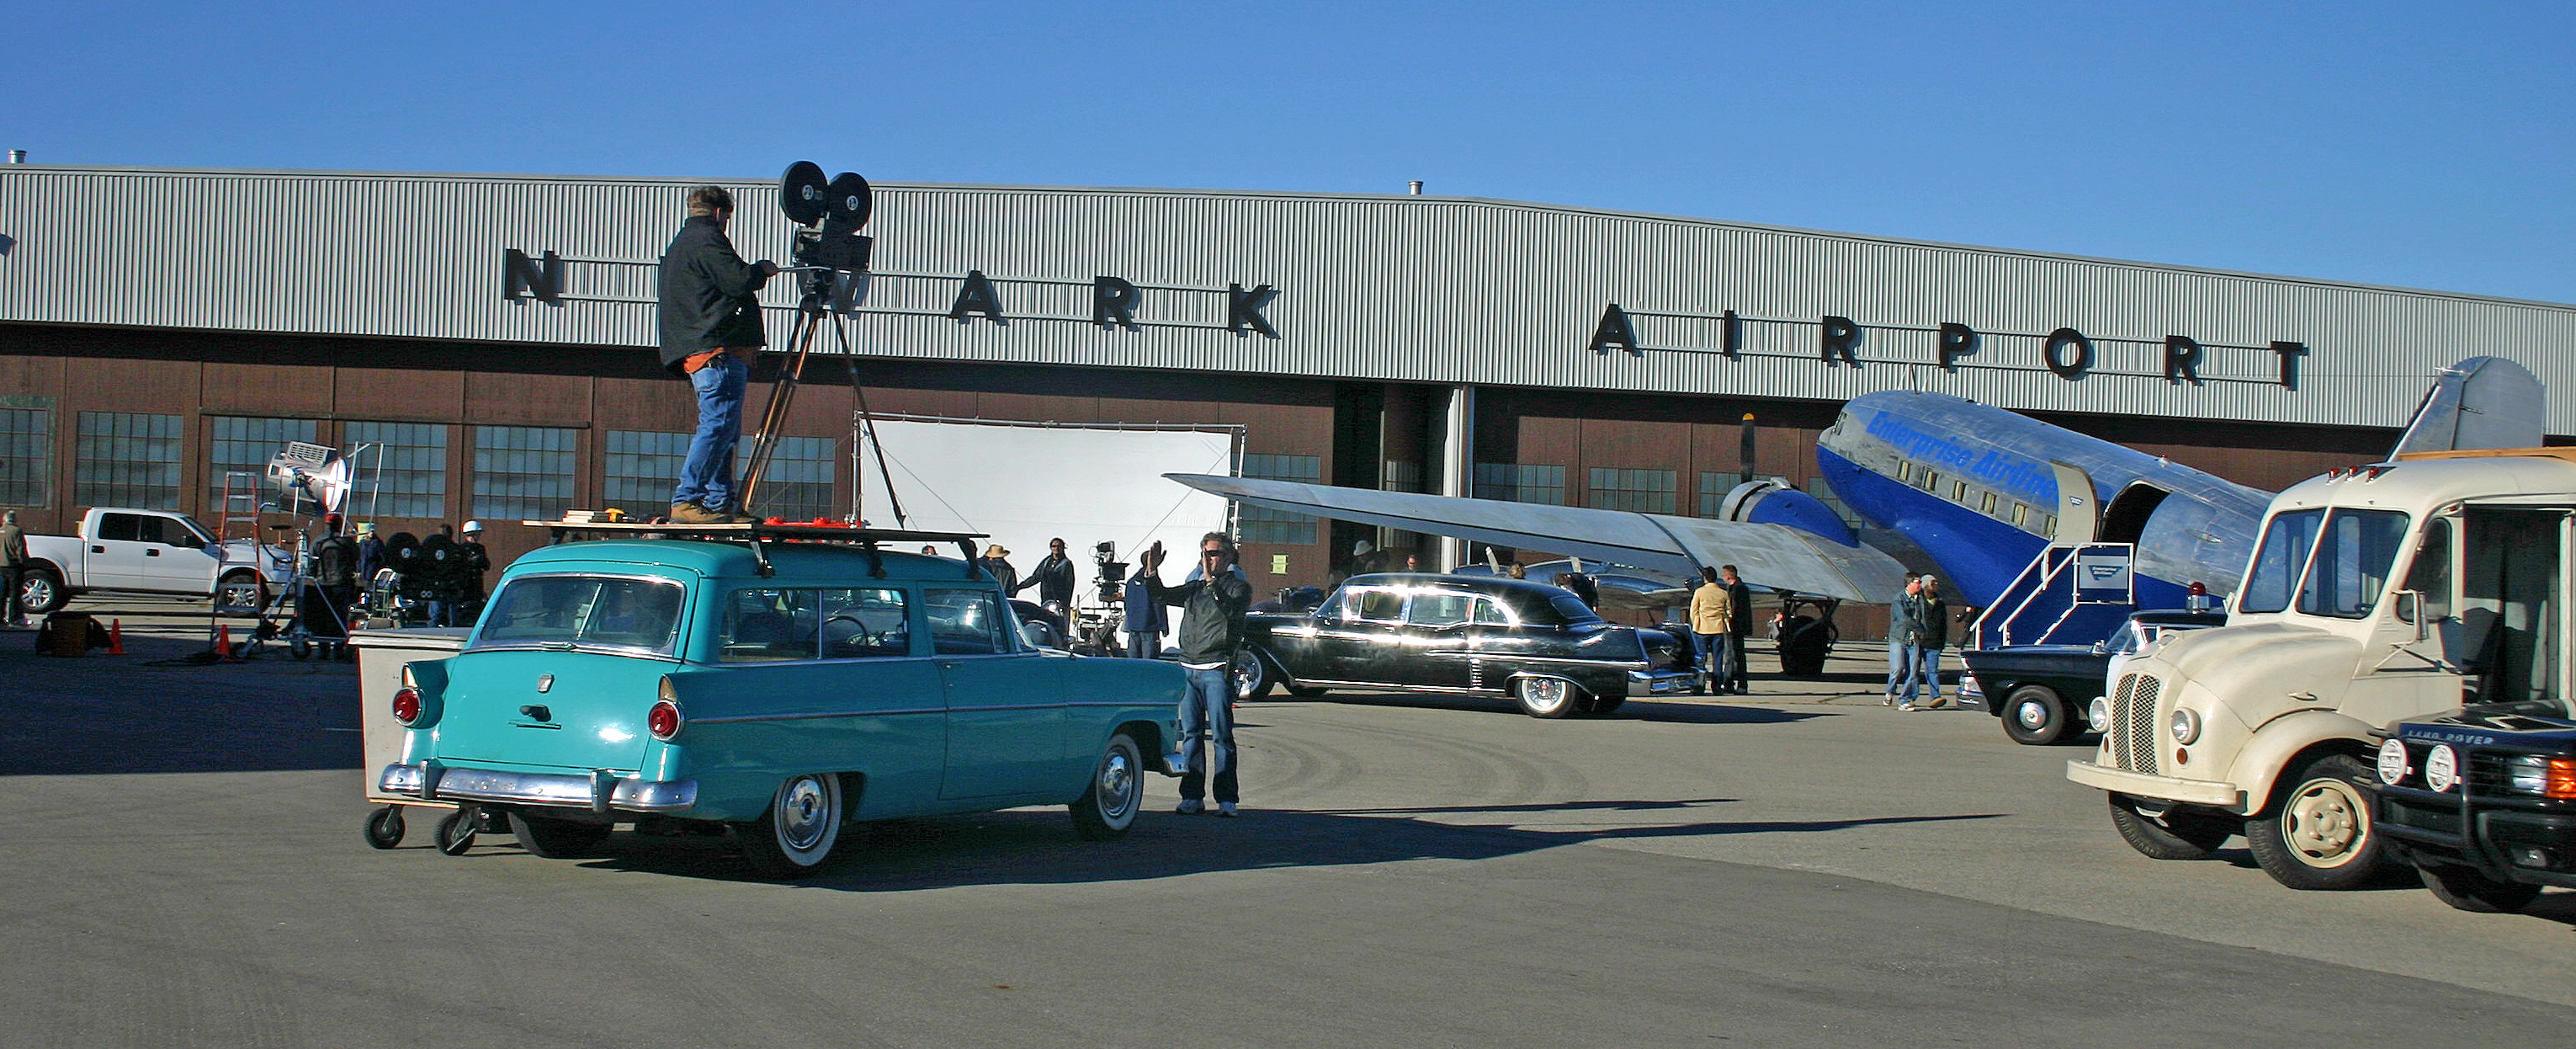 Image of a movie being filmed at the Brantford airport.